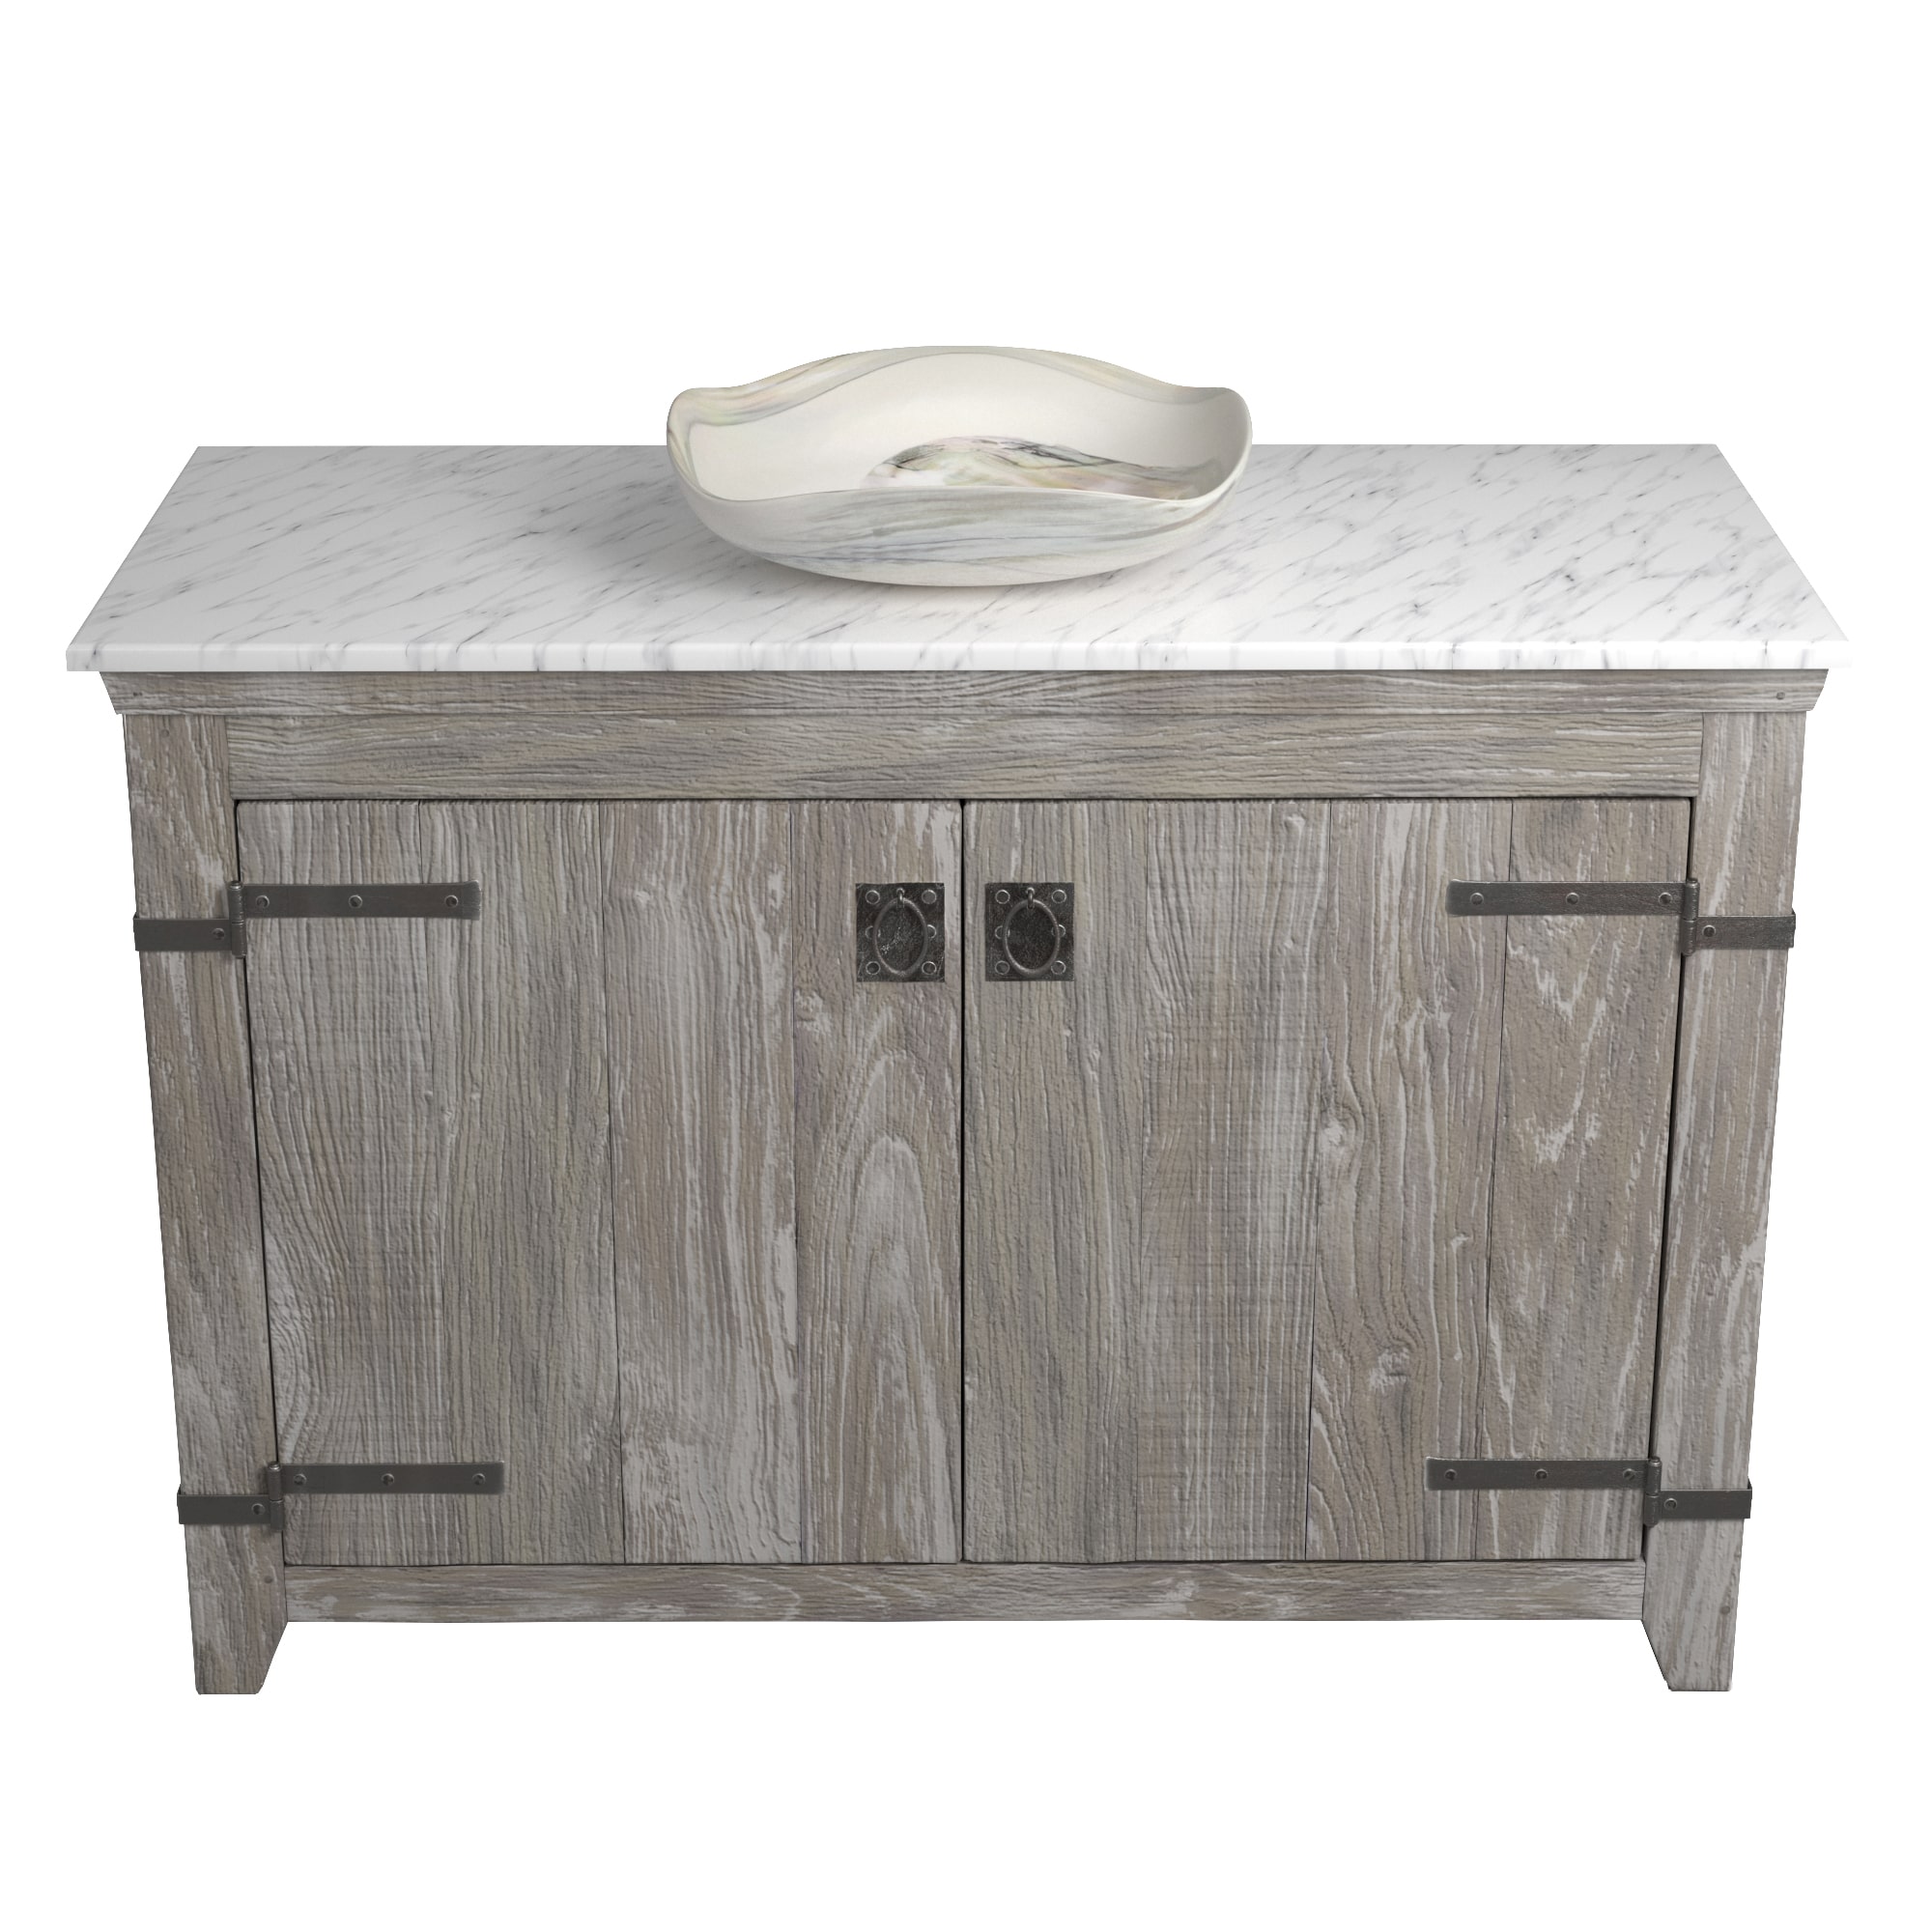 Native Trails 48" Americana Vanity in Driftwood with Carrara Marble Top and Lido in Abalone, Single Faucet Hole, BND48-VB-CT-MG-007